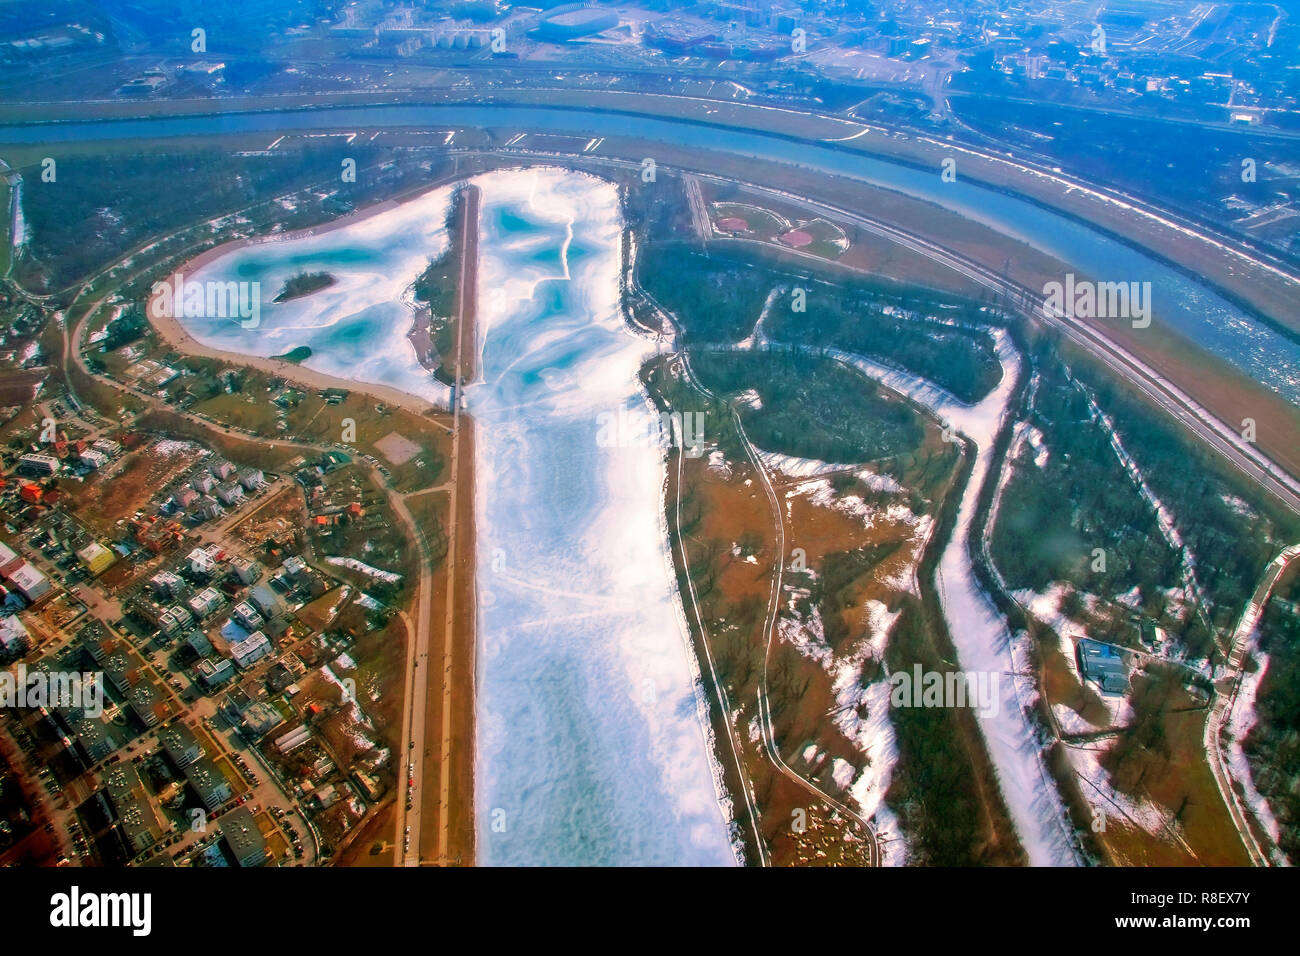 Zagreb, Croatia - February 25, 2012: Flying over the frozen lake Jarun in Zagreb with the cessna airplane Stock Photo